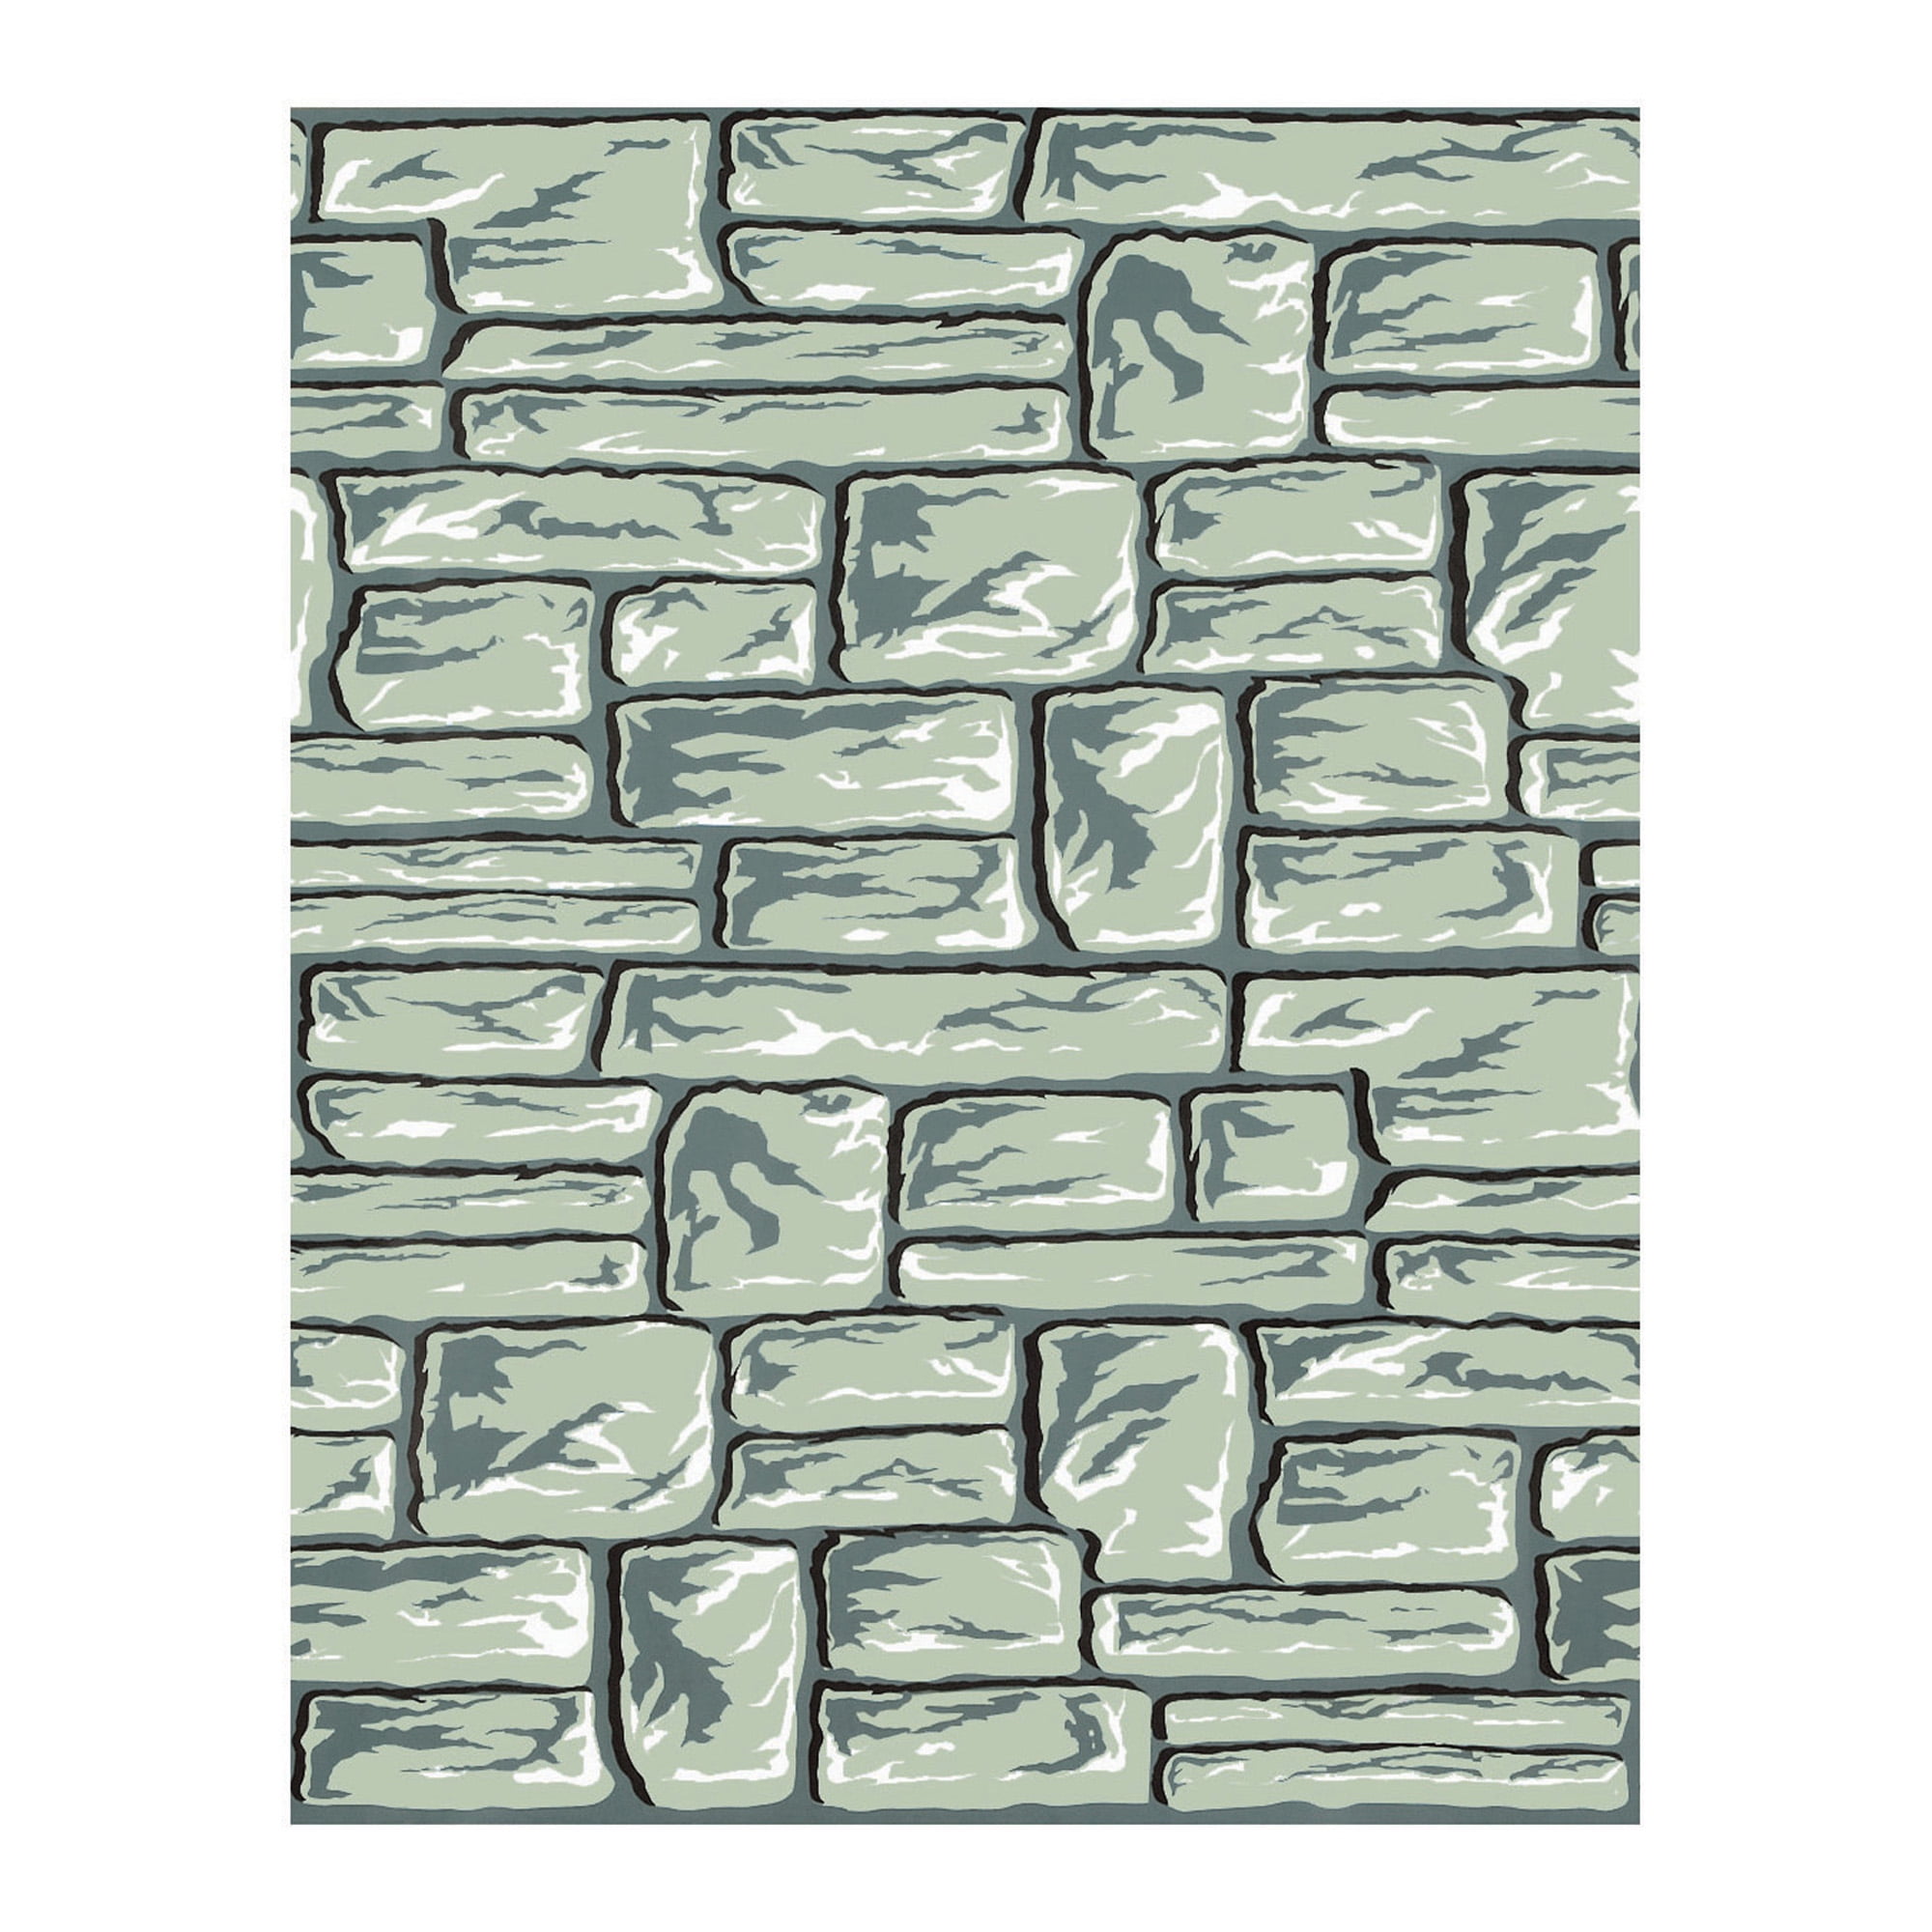 48 Inches x 50 Feet Fadeless Designs Paper Roll Rock Wall 